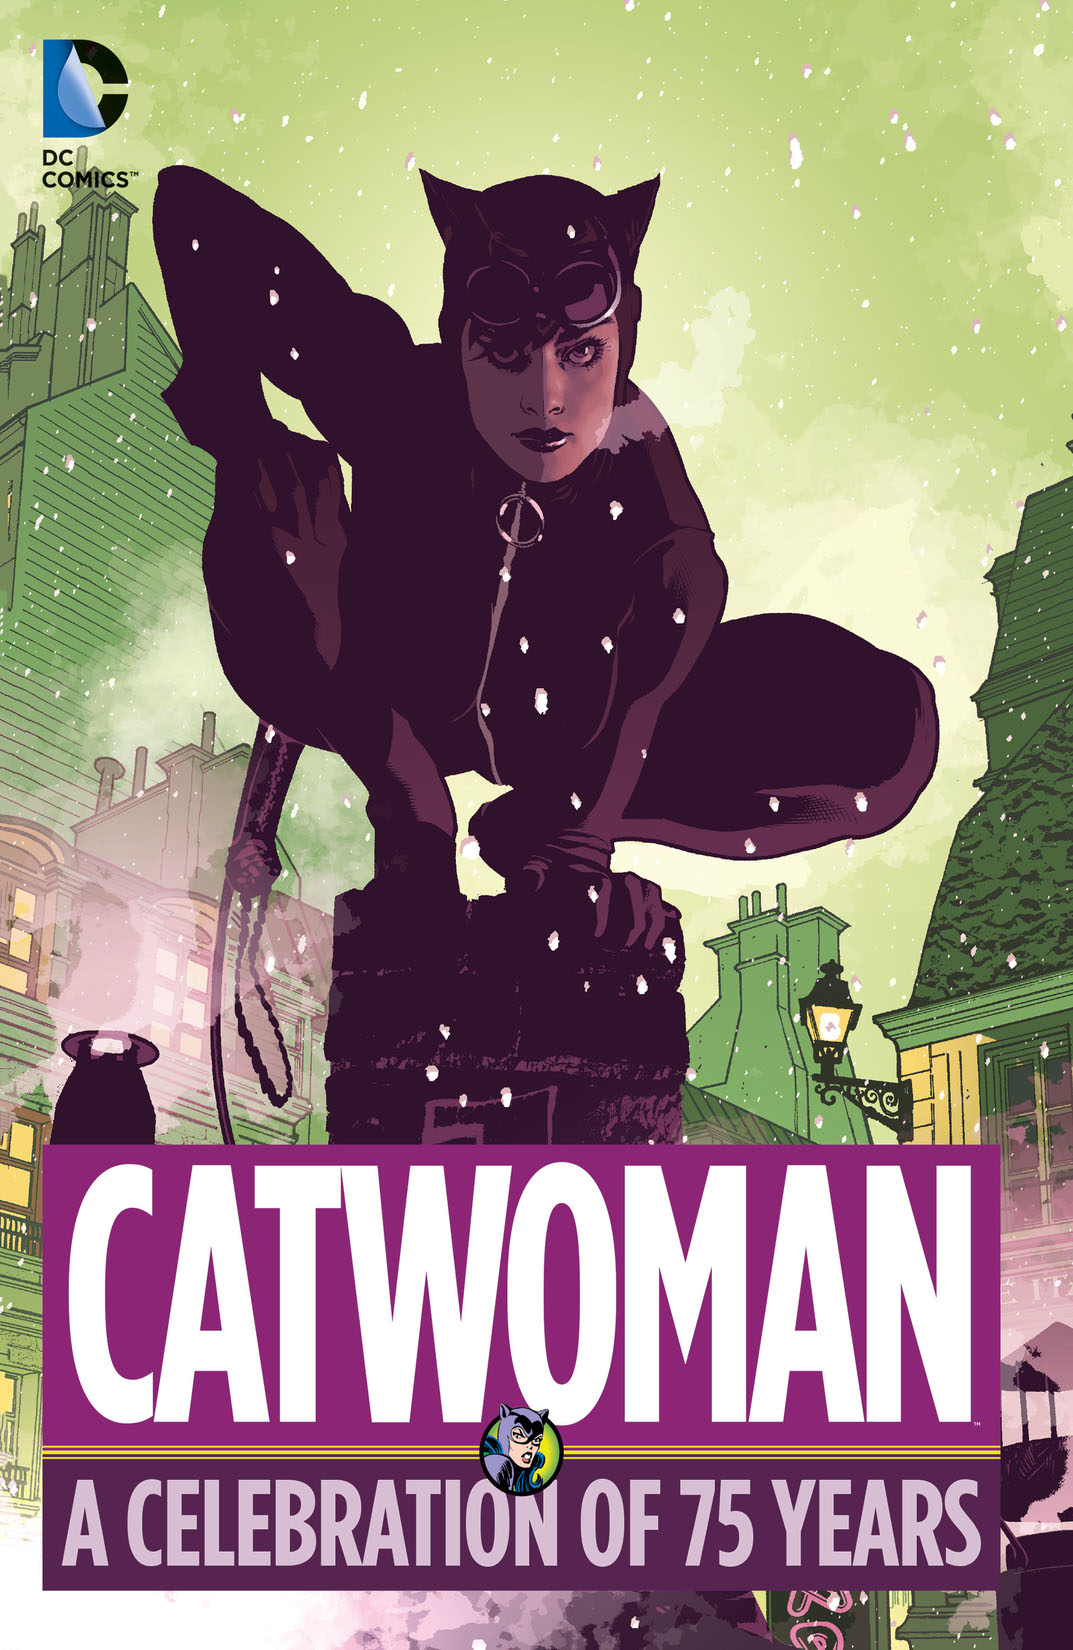 Catwoman: A Celebration of 75 Years preview images